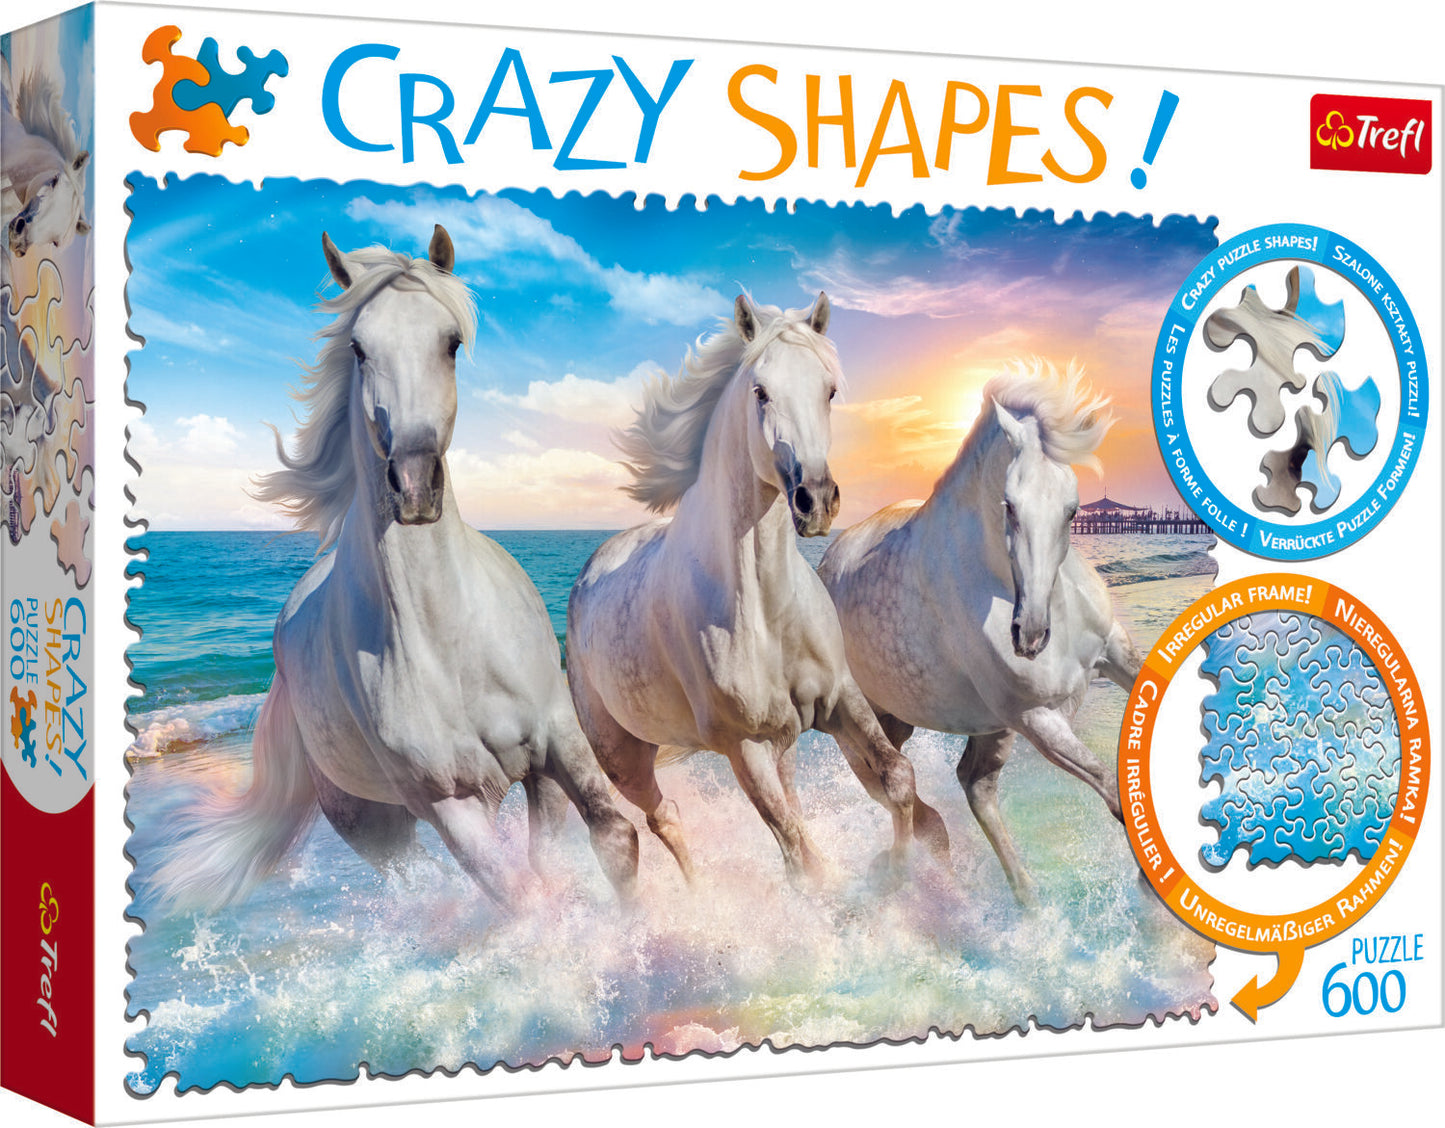 Trefl 600 Piece Crazy Shape Jigsaw Puzzle Horses Gallop Among the Waves